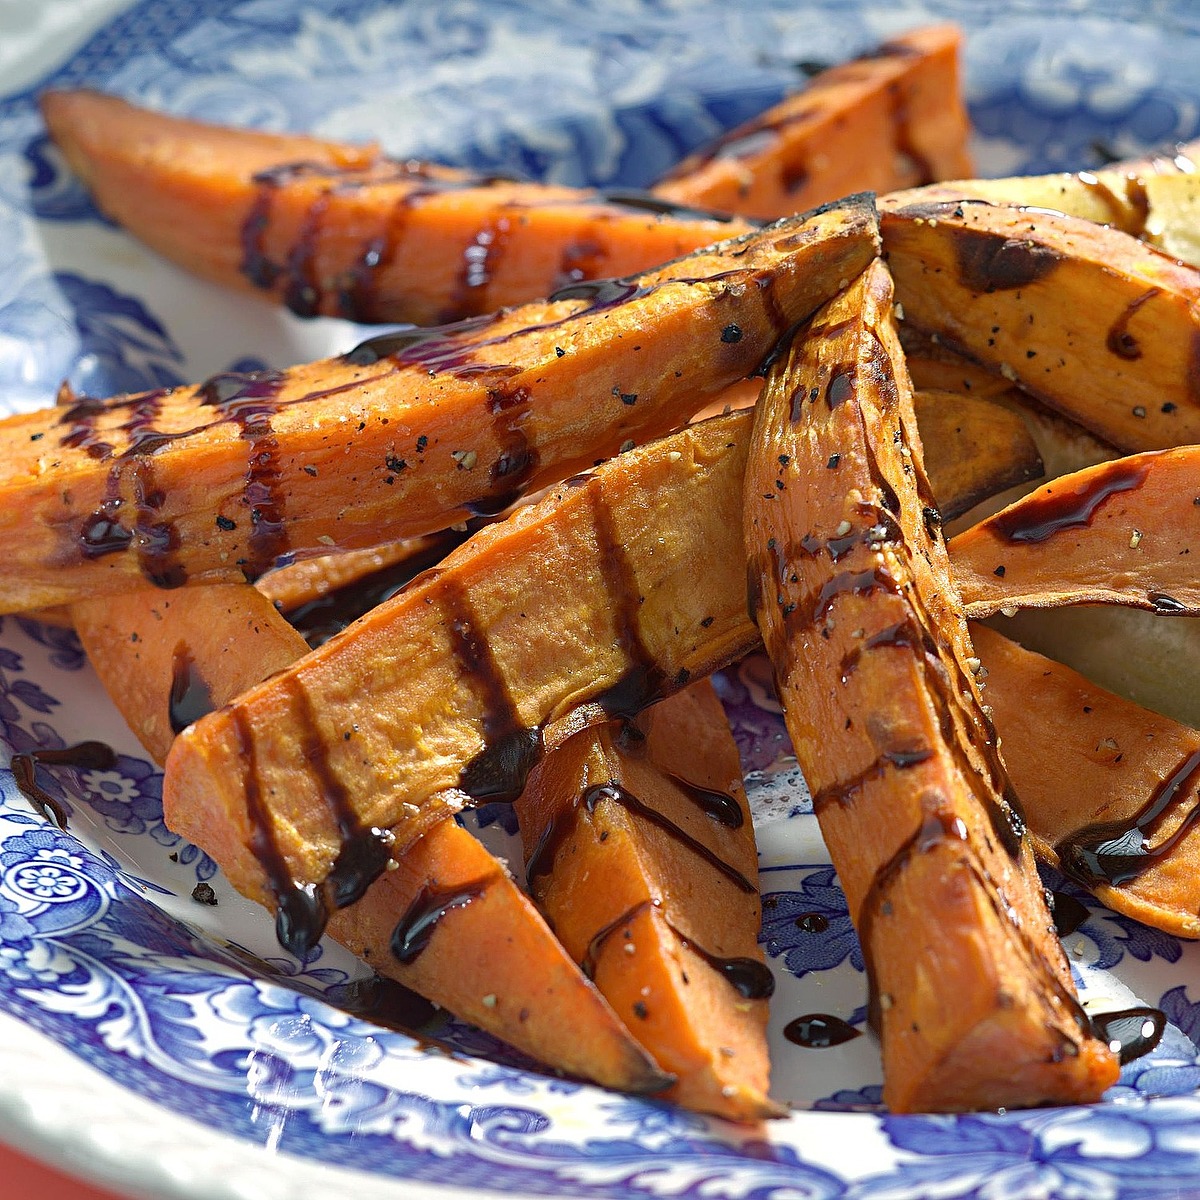 Roasted Sweet Potatoes with Balsamic Drizzle